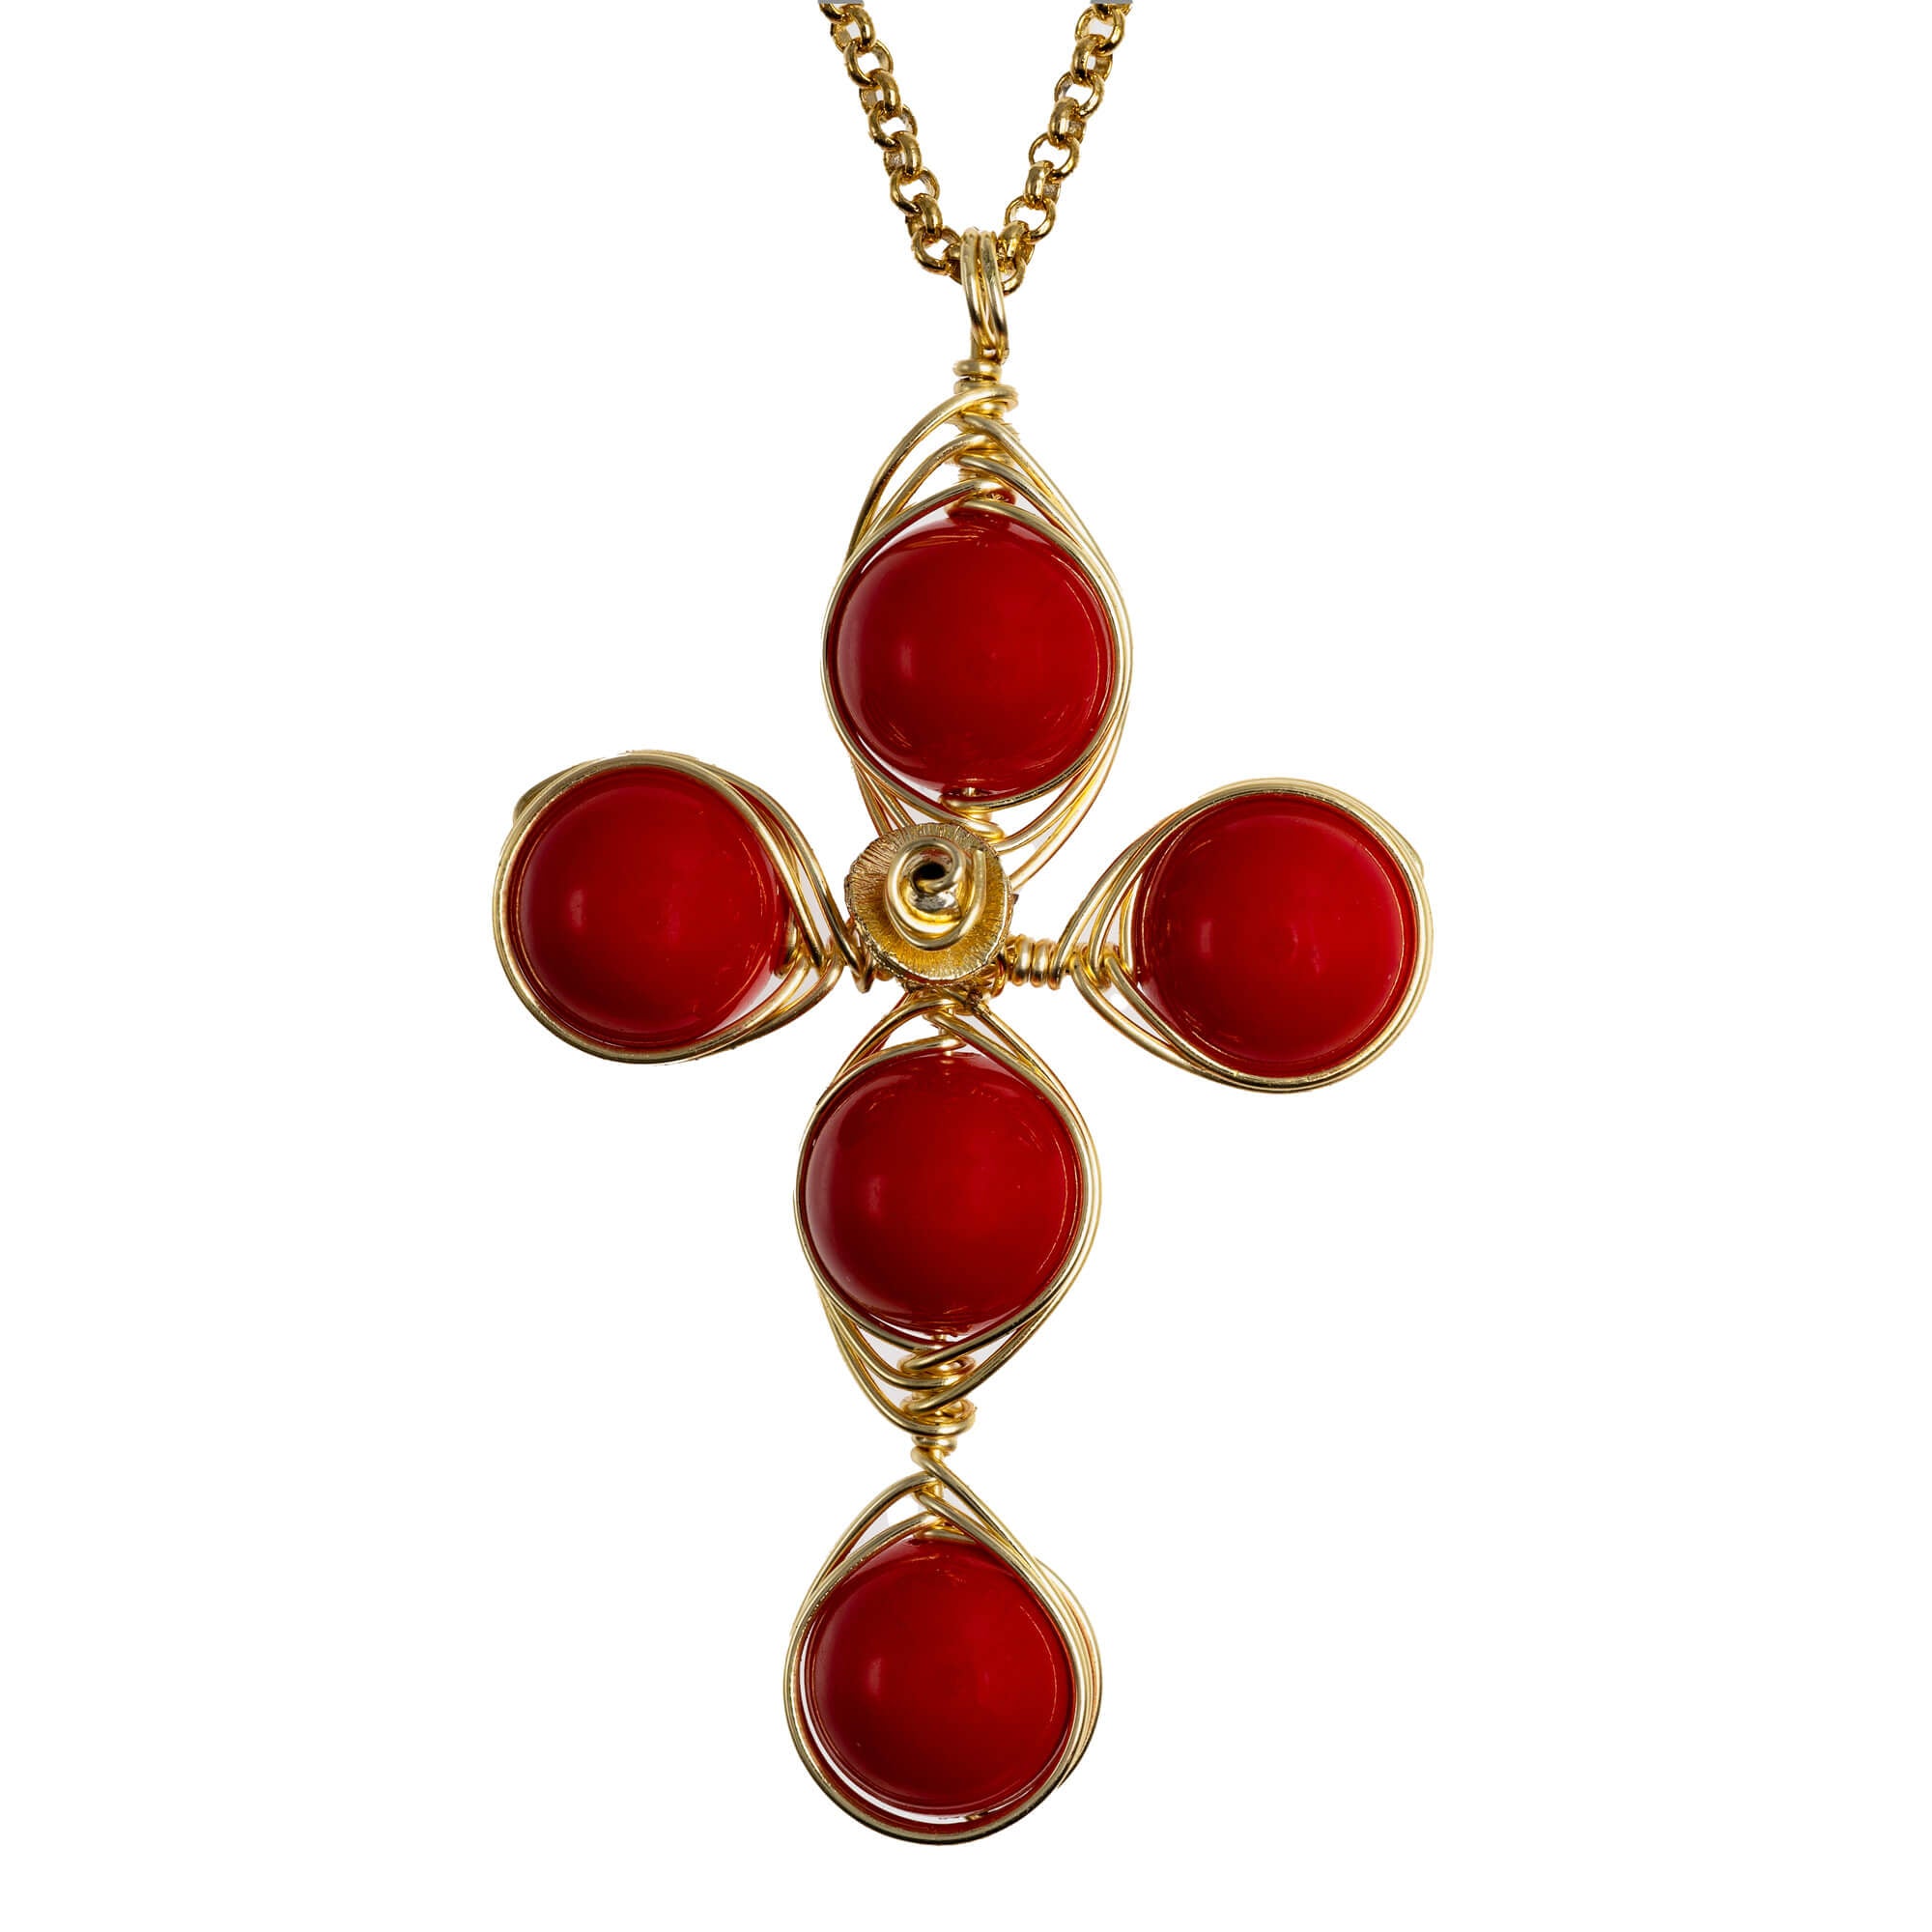 Magic Rouge Cross Pendant Necklace is 2.5 inches long on a 16 inches 22K gold plated chain. Handmade with Non-tarnish gold plated wire and Polished Red Dyed Shells Beads. Gold and red minimalist Wired Wrapped Cross.